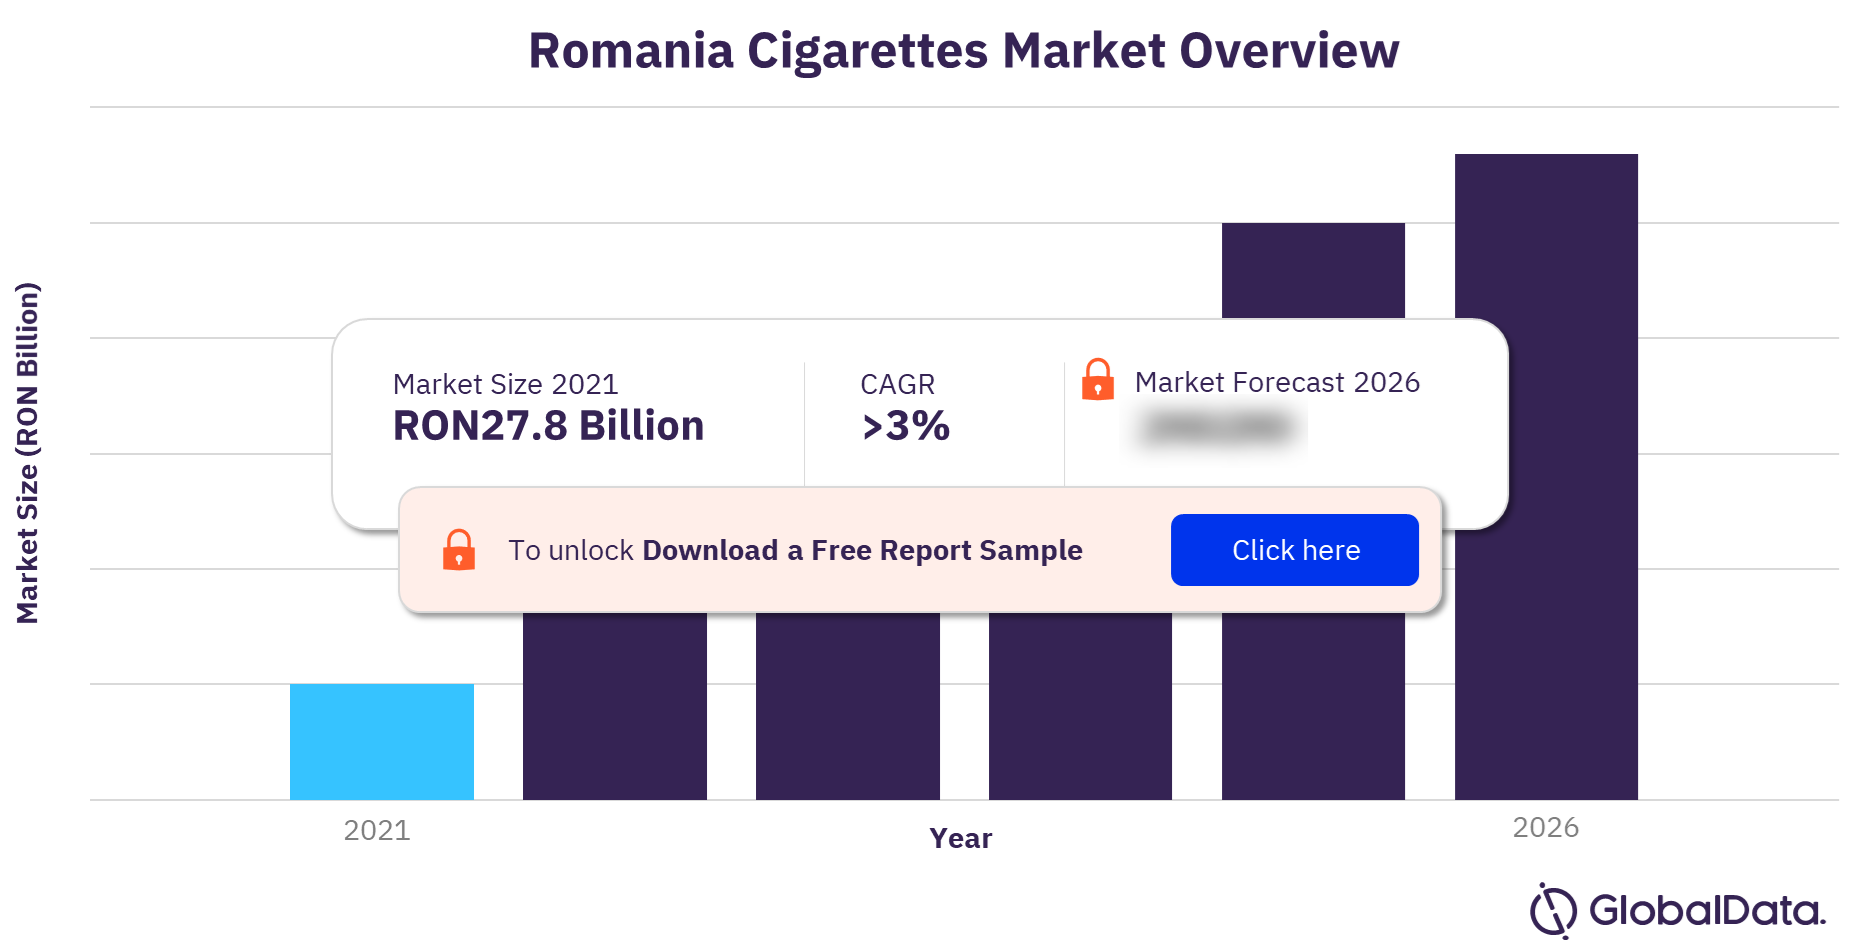 Romania Cigarettes Market Report Overview The Romanian cigarettes market size was RON27.8 billion ($6.7 billion) in 2021. The market is expected to achieve a CAGR of more than 3% during 2021-2026.  Per capita expenditure of cigarettes in Romania was higher compared to both the global and regional (Eastern Europe) levels. However, Romania government is expected to increase excise tax on tobacco products as per EU directive, this may have a negative effect on the volume of sales during forecast period.  The Romania cigarettes market research report provides a comprehensive overview of the cigarettes sector in Romania. 